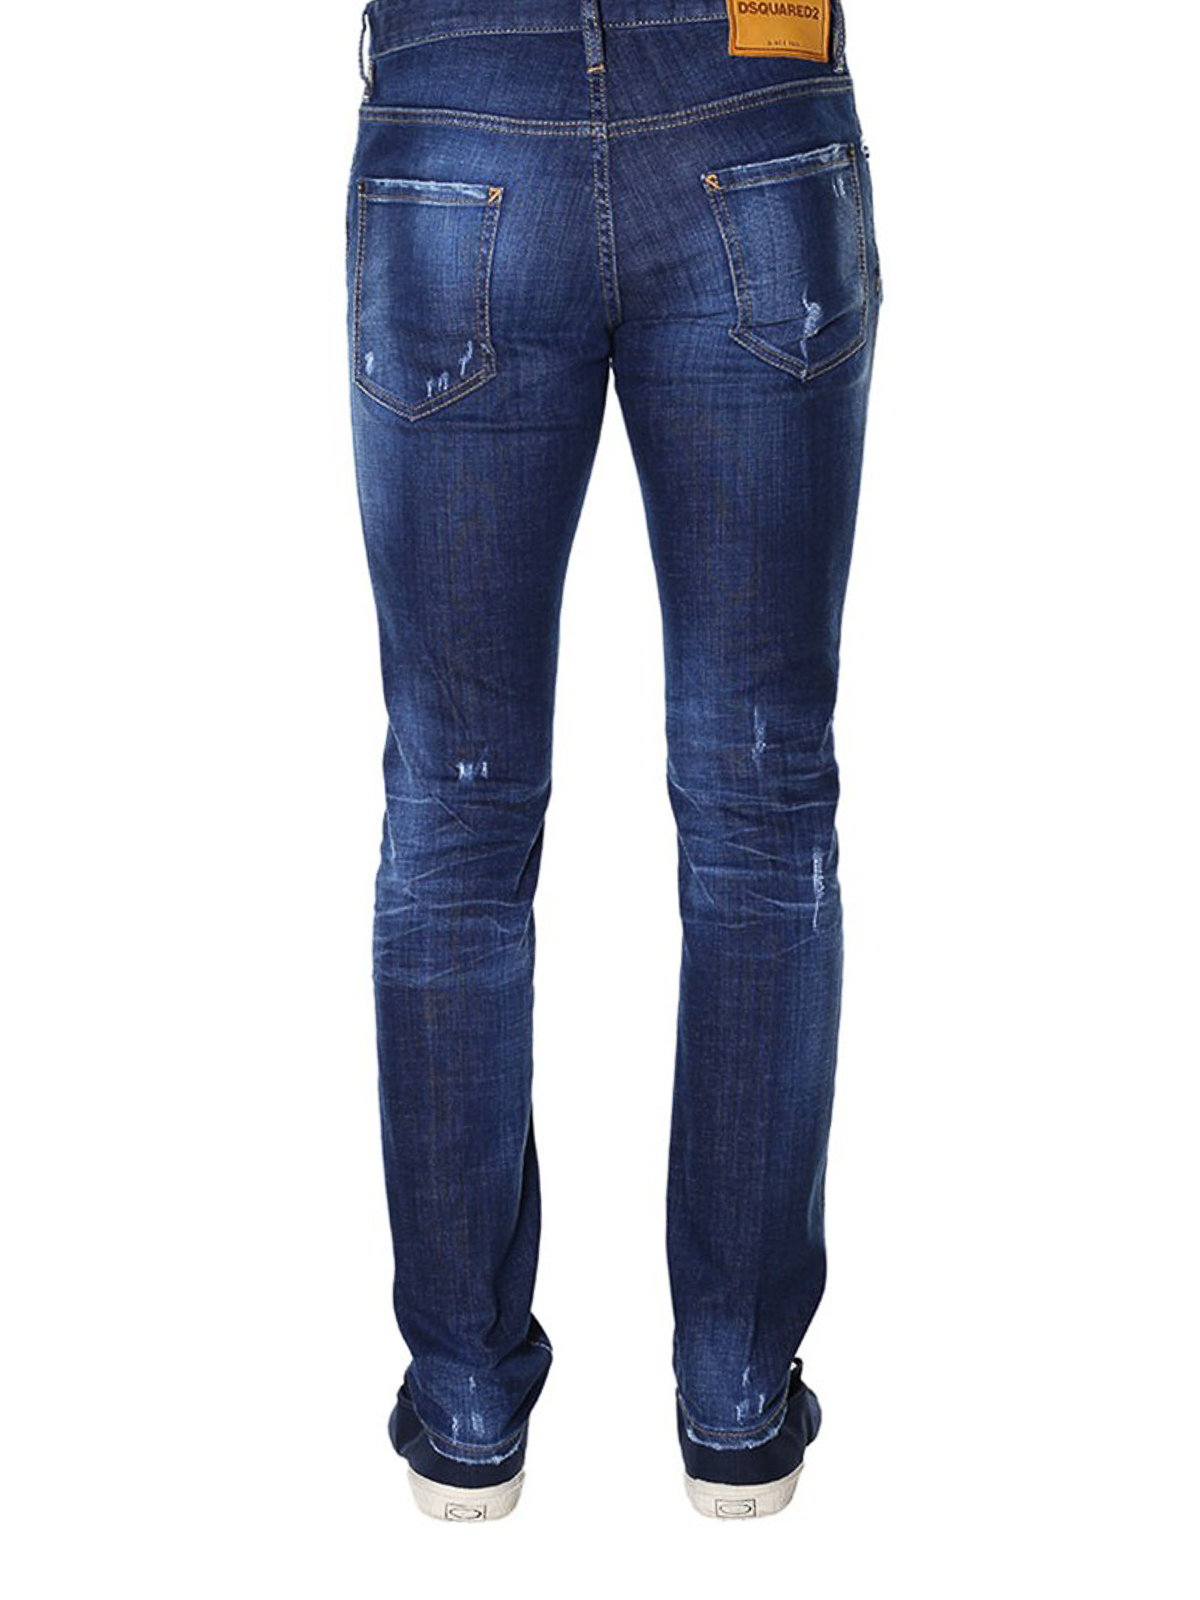 dsquared2 cool guy distressed jeans